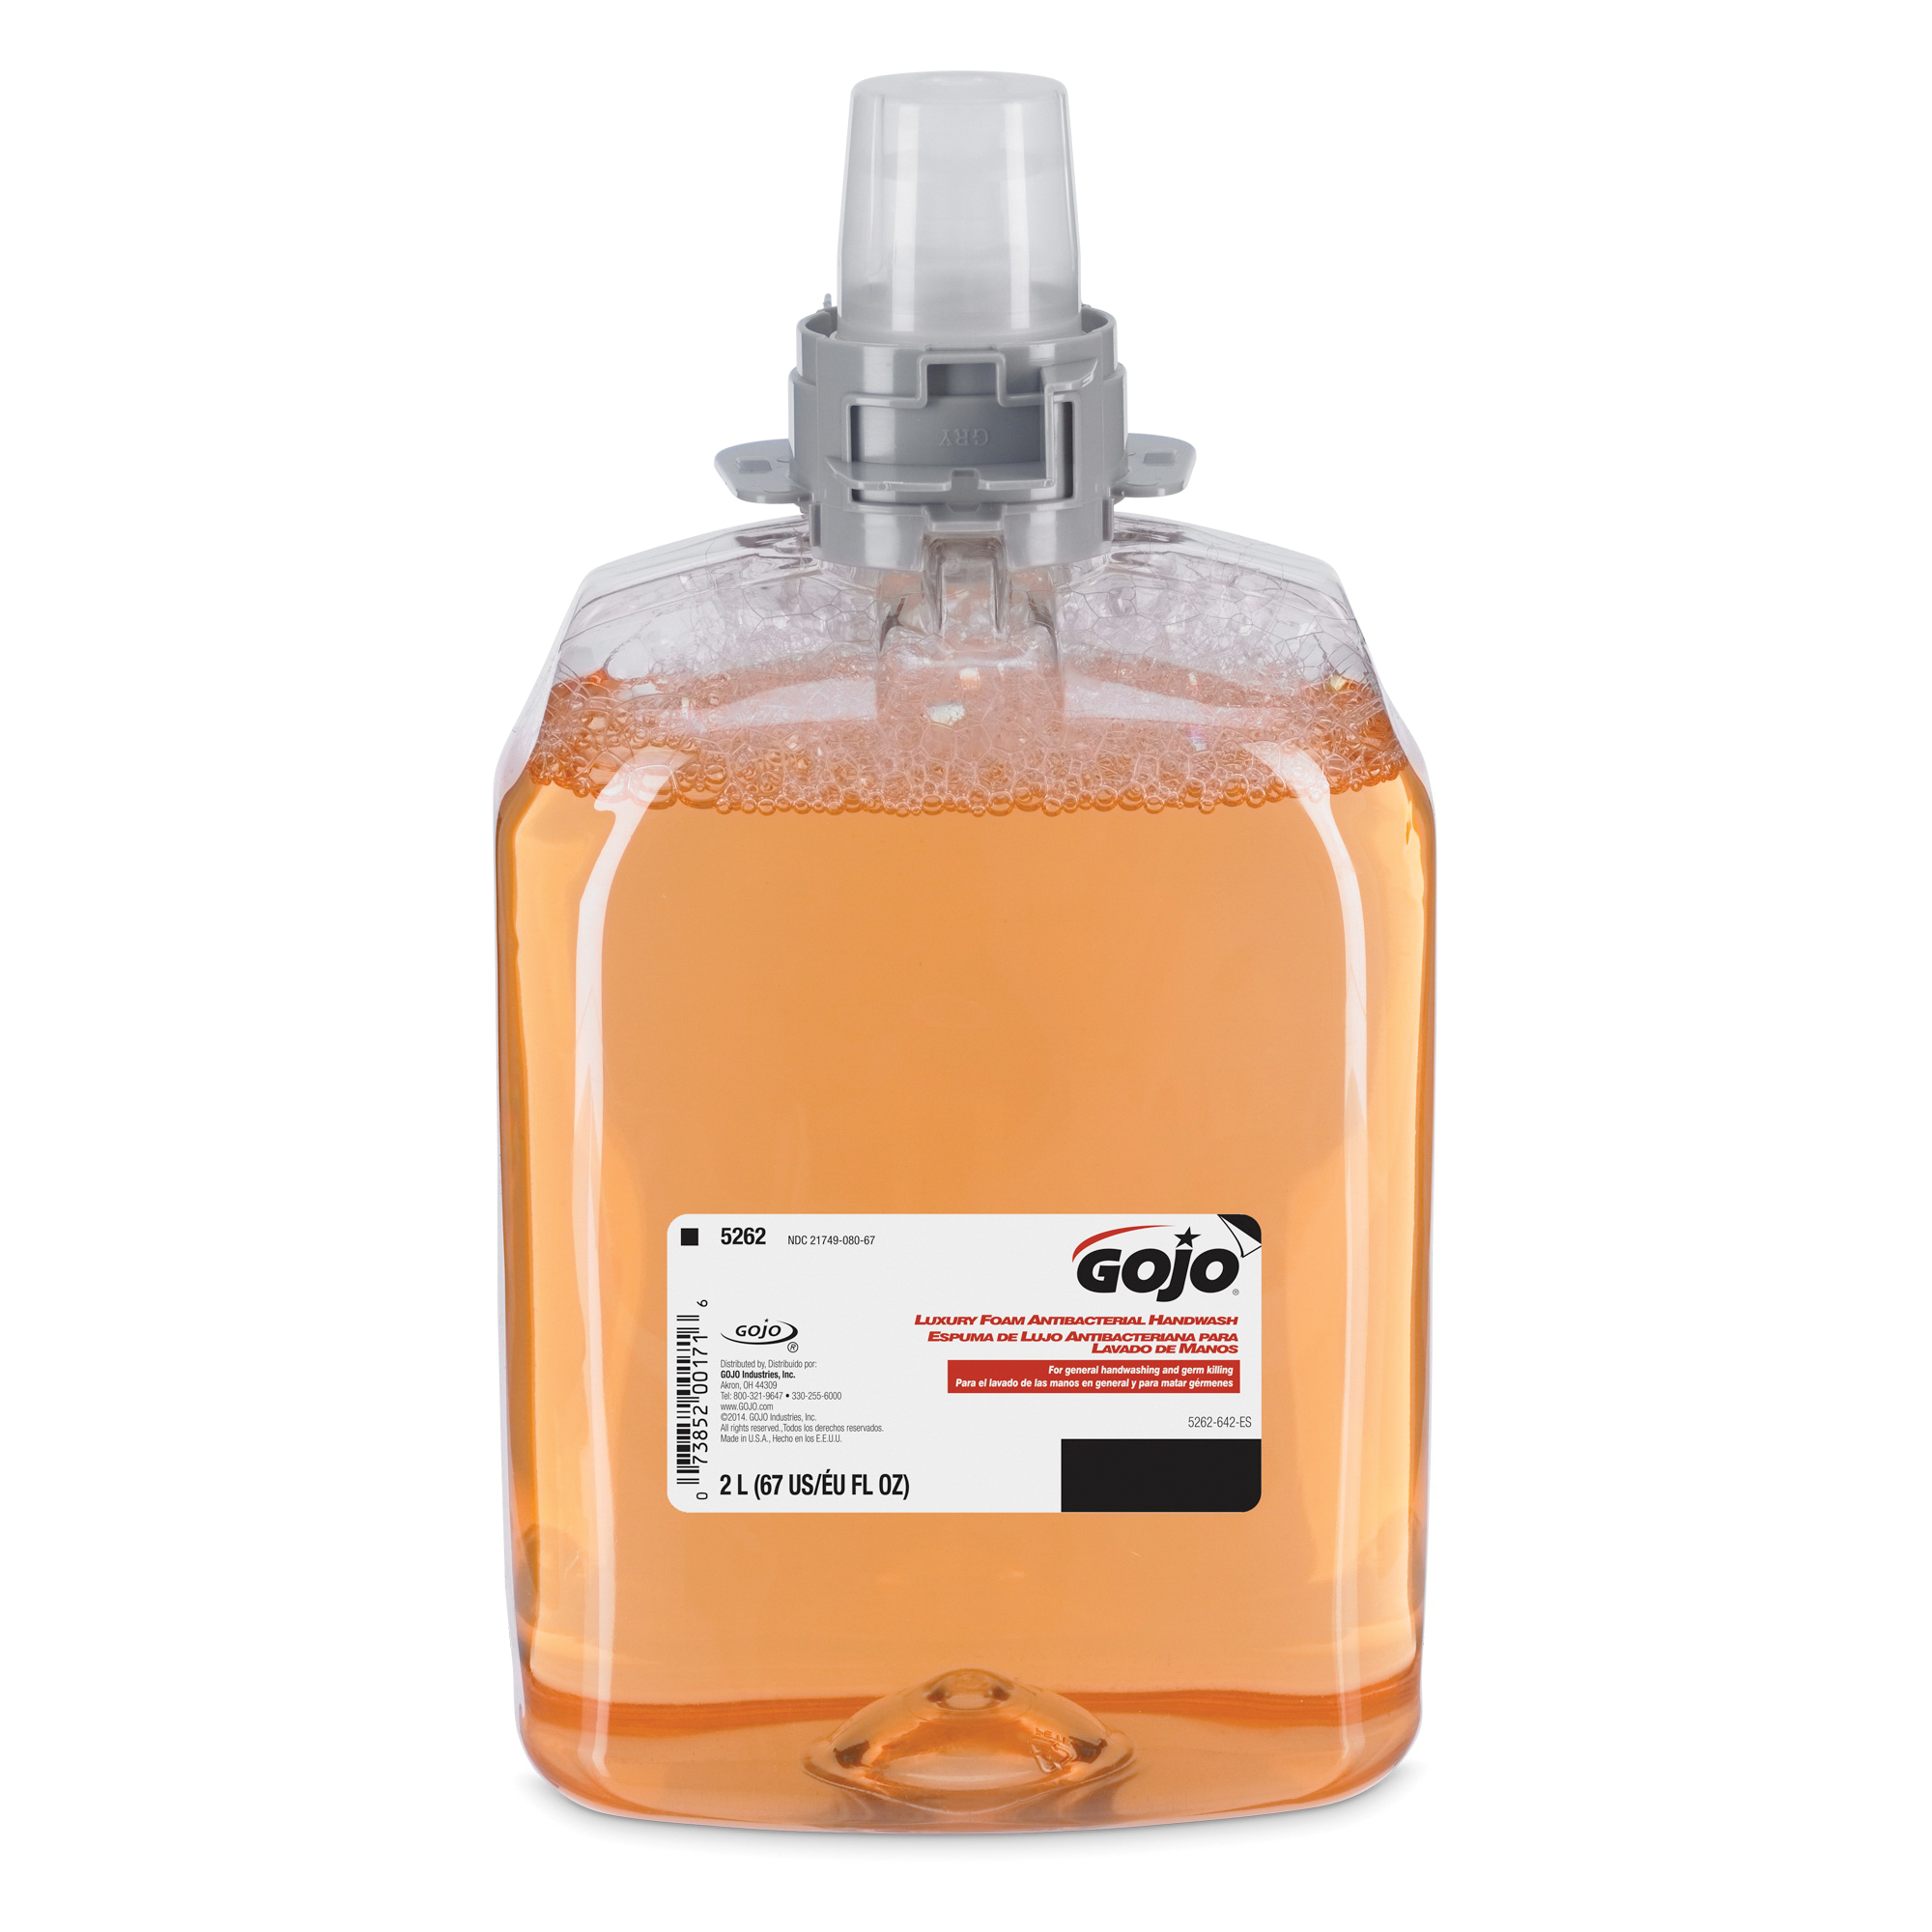 GOJO® 9212-12 Ultra Mild Antimicrobial Lotion Soap, 800 mL Nominal, Dispenser Refill Package, Liquid Form, Floral Odor/Scent, Amber